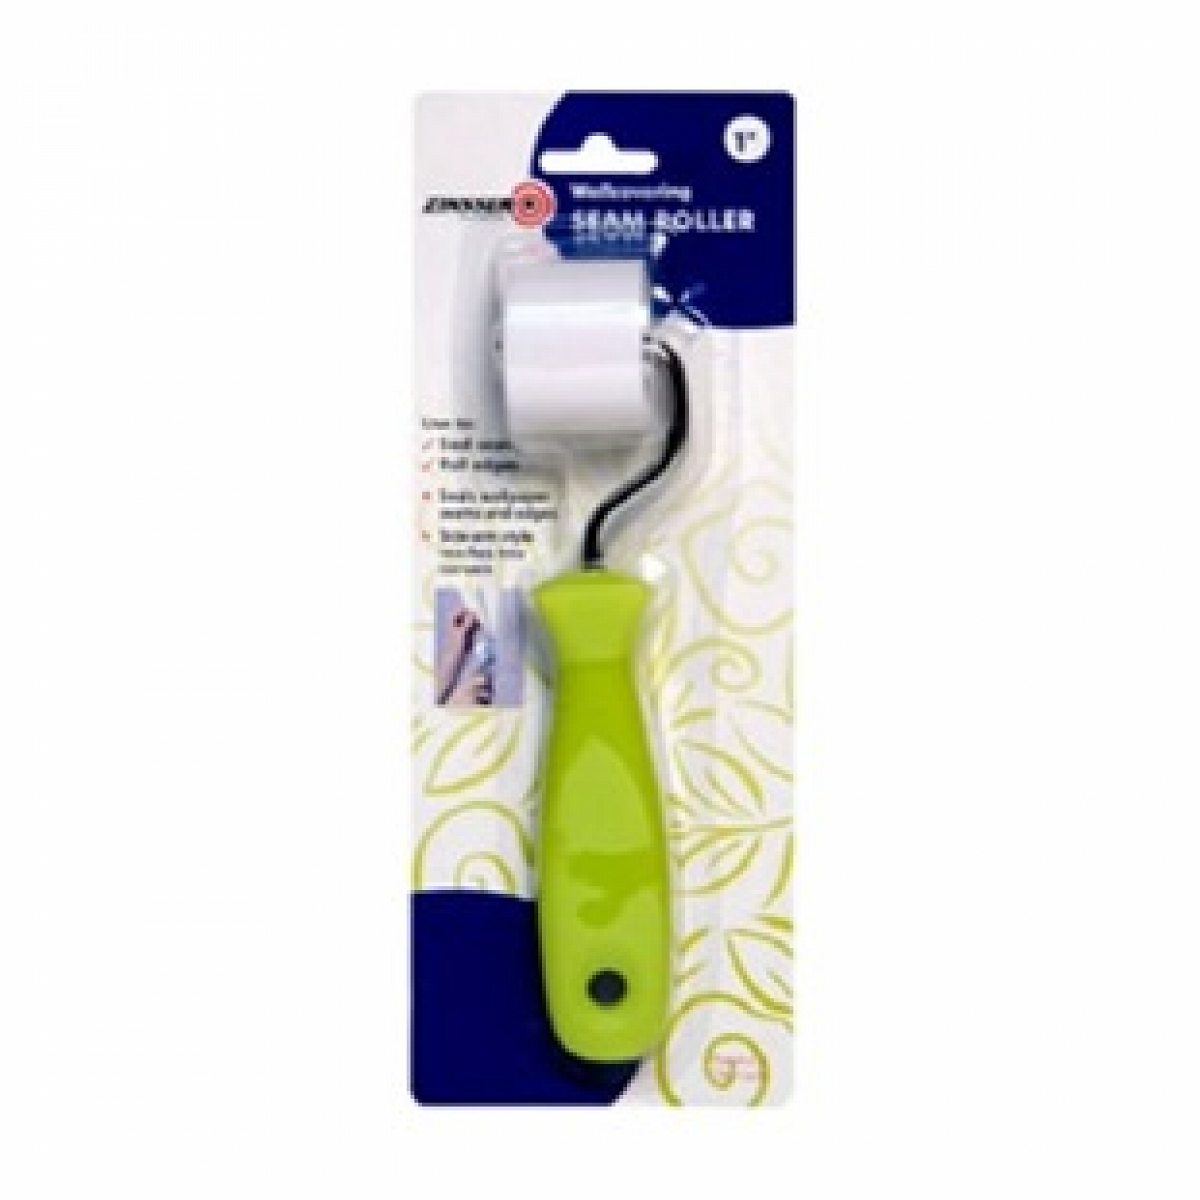 Wallpaper Seam Roller Join The Pricefalls Family